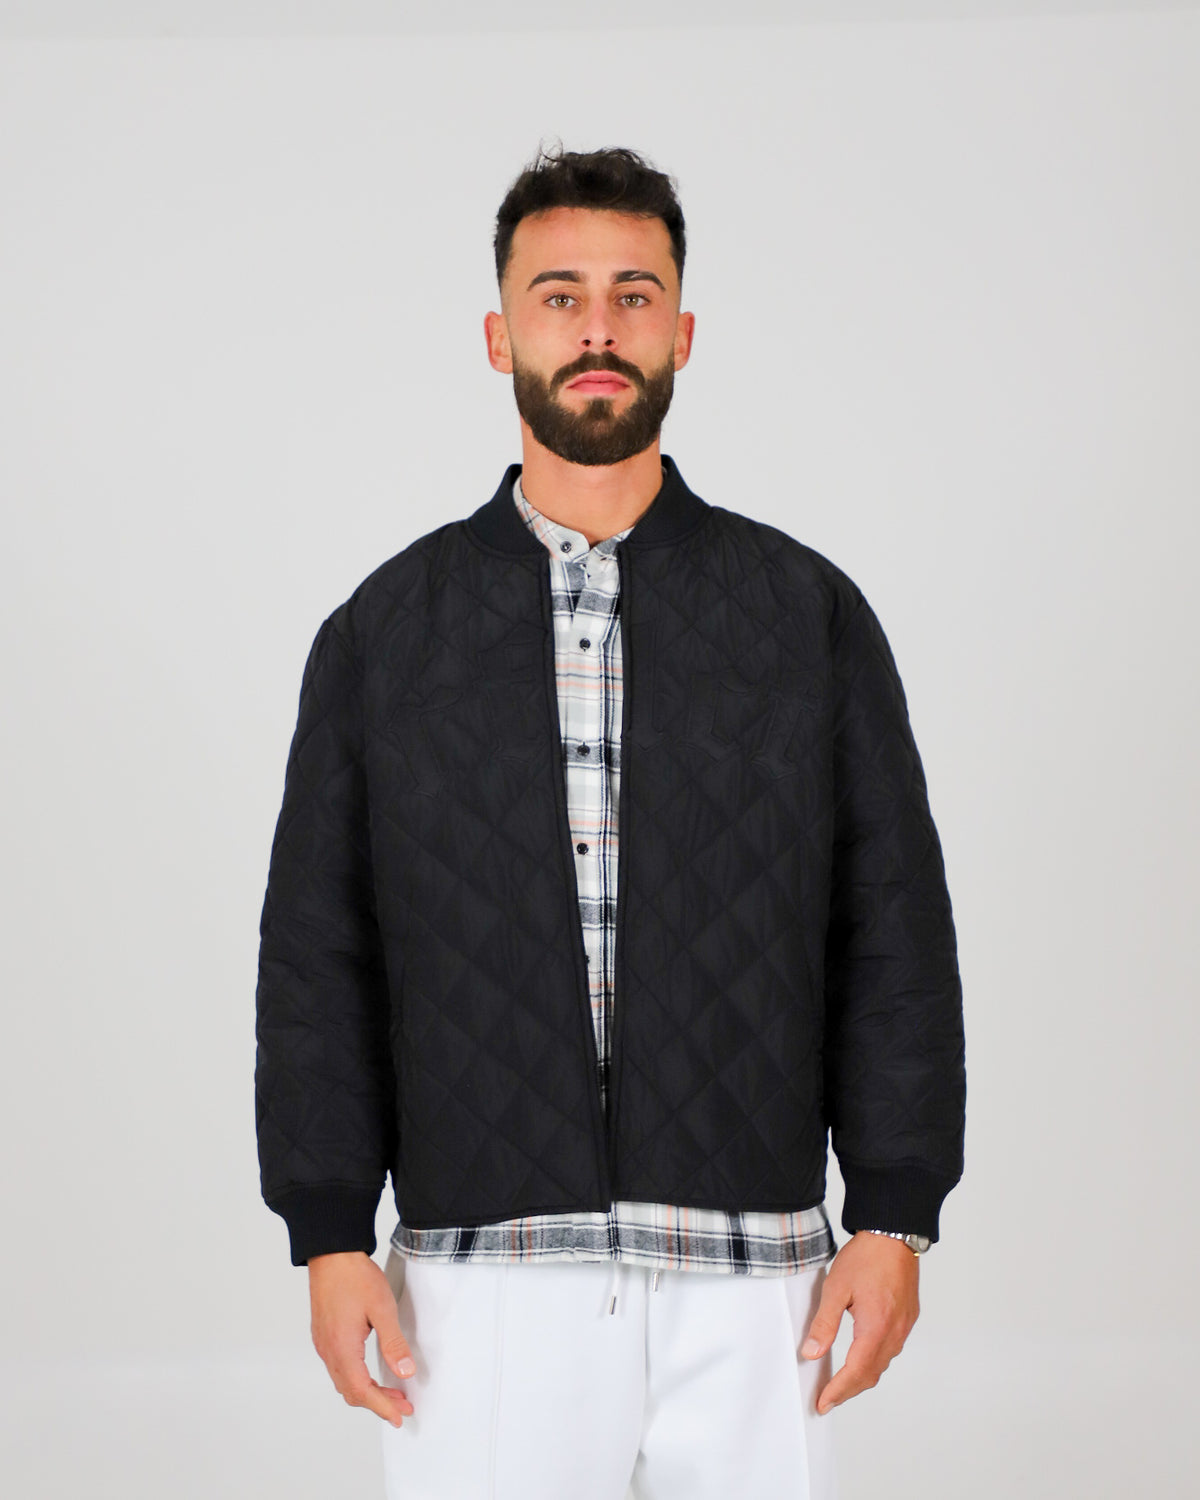 REFLECT YOURSELF JACKET BLK